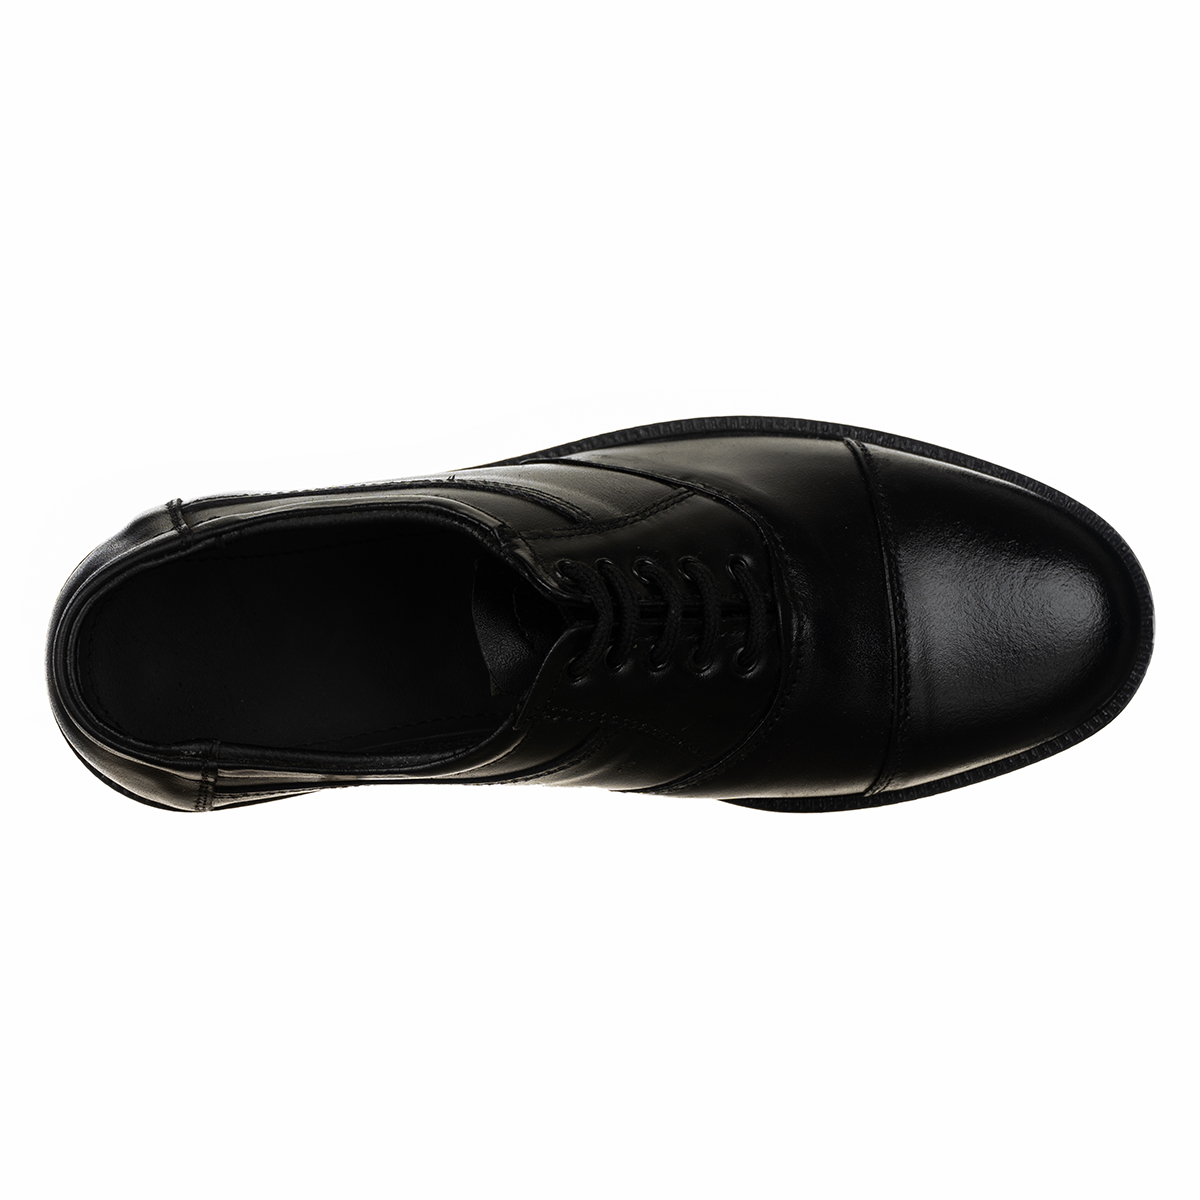 Mens Leather Oxford Shoes Manufacturers, Suppliers in Pune